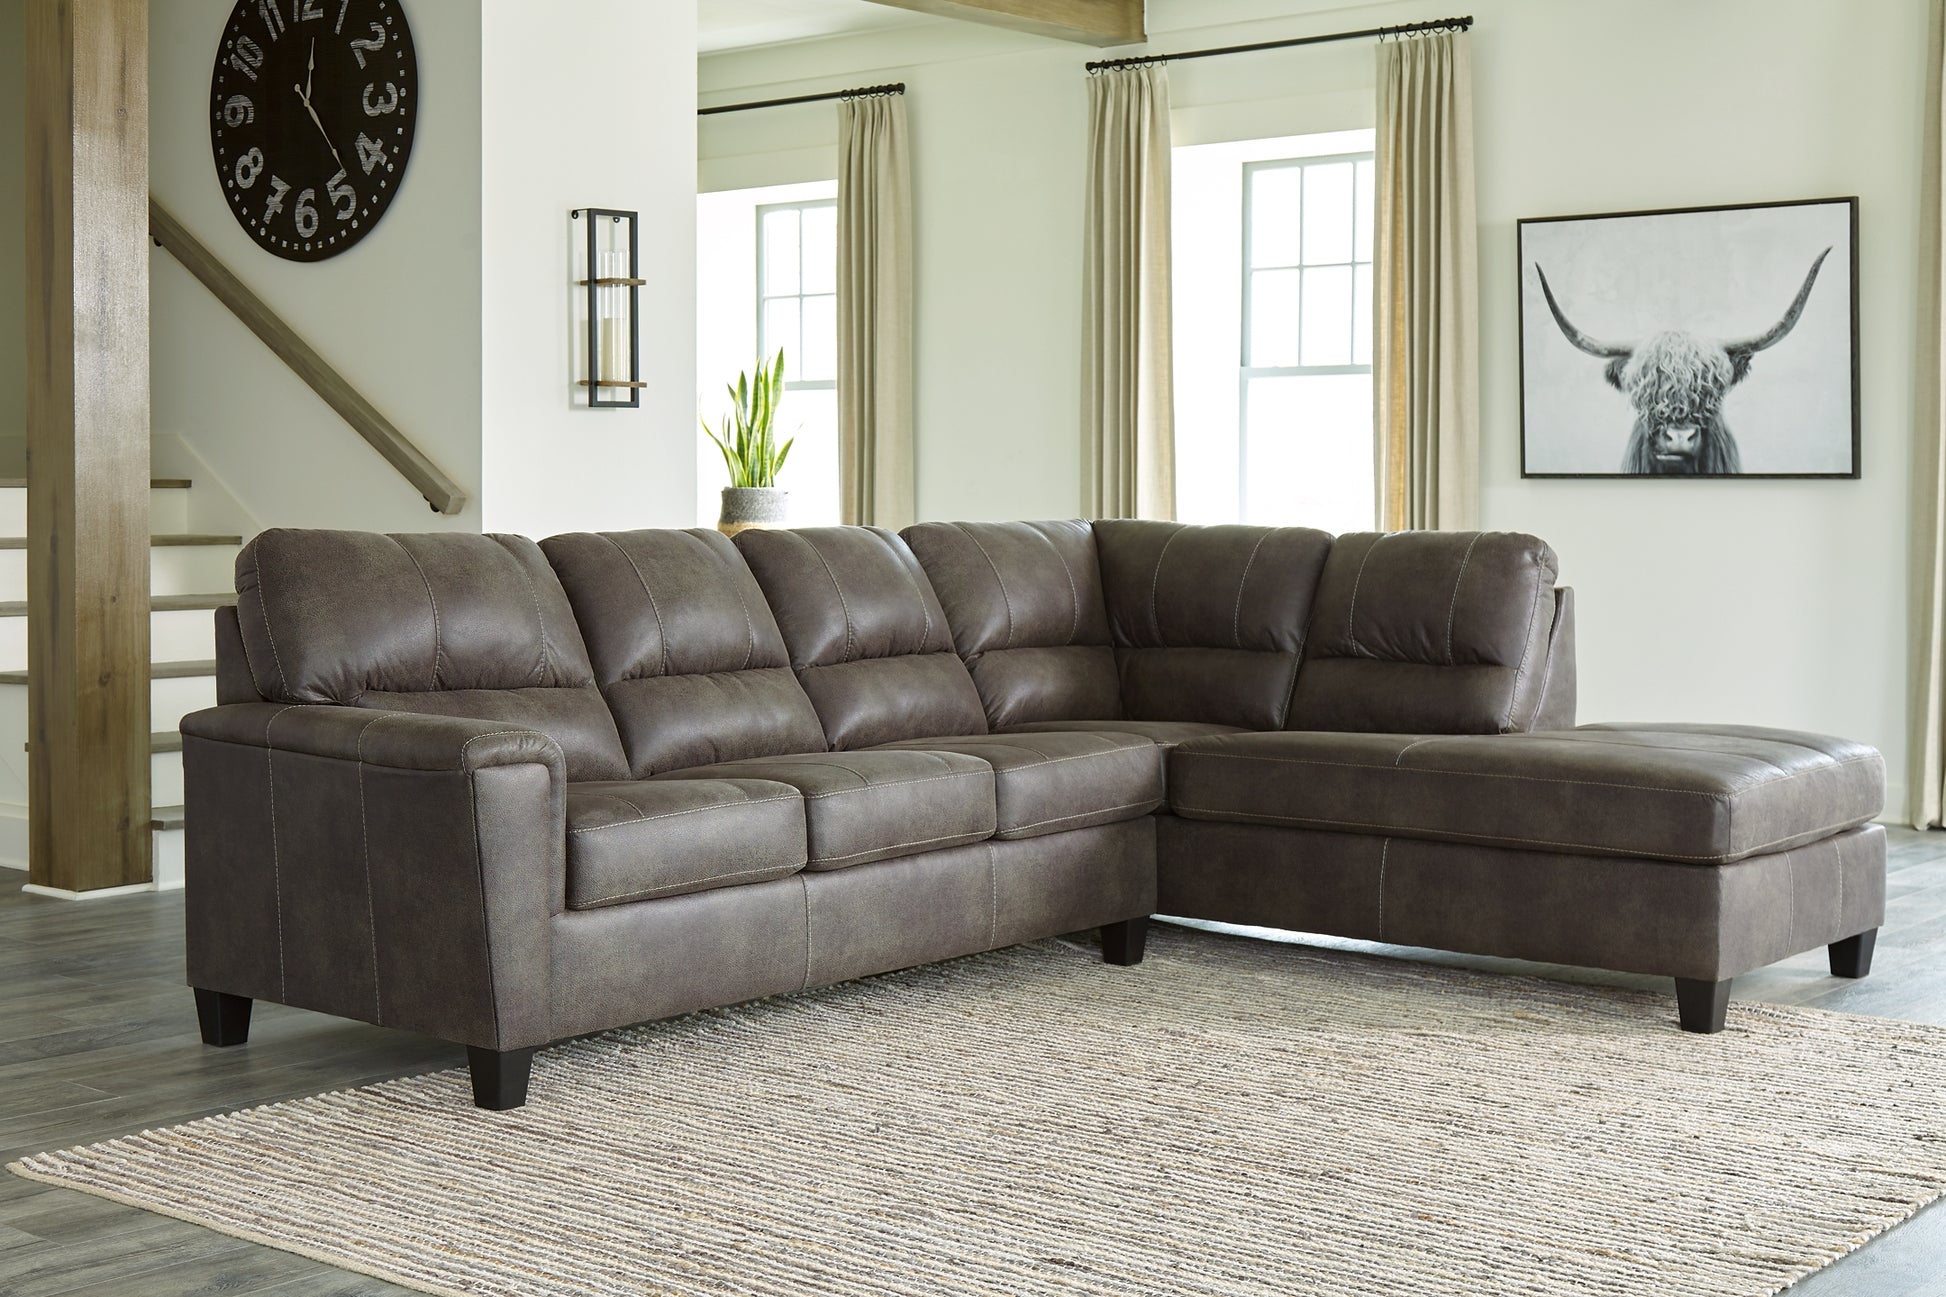 Navi 2-Piece Sleeper Sectional with Chaise JB's Furniture  Home Furniture, Home Decor, Furniture Store